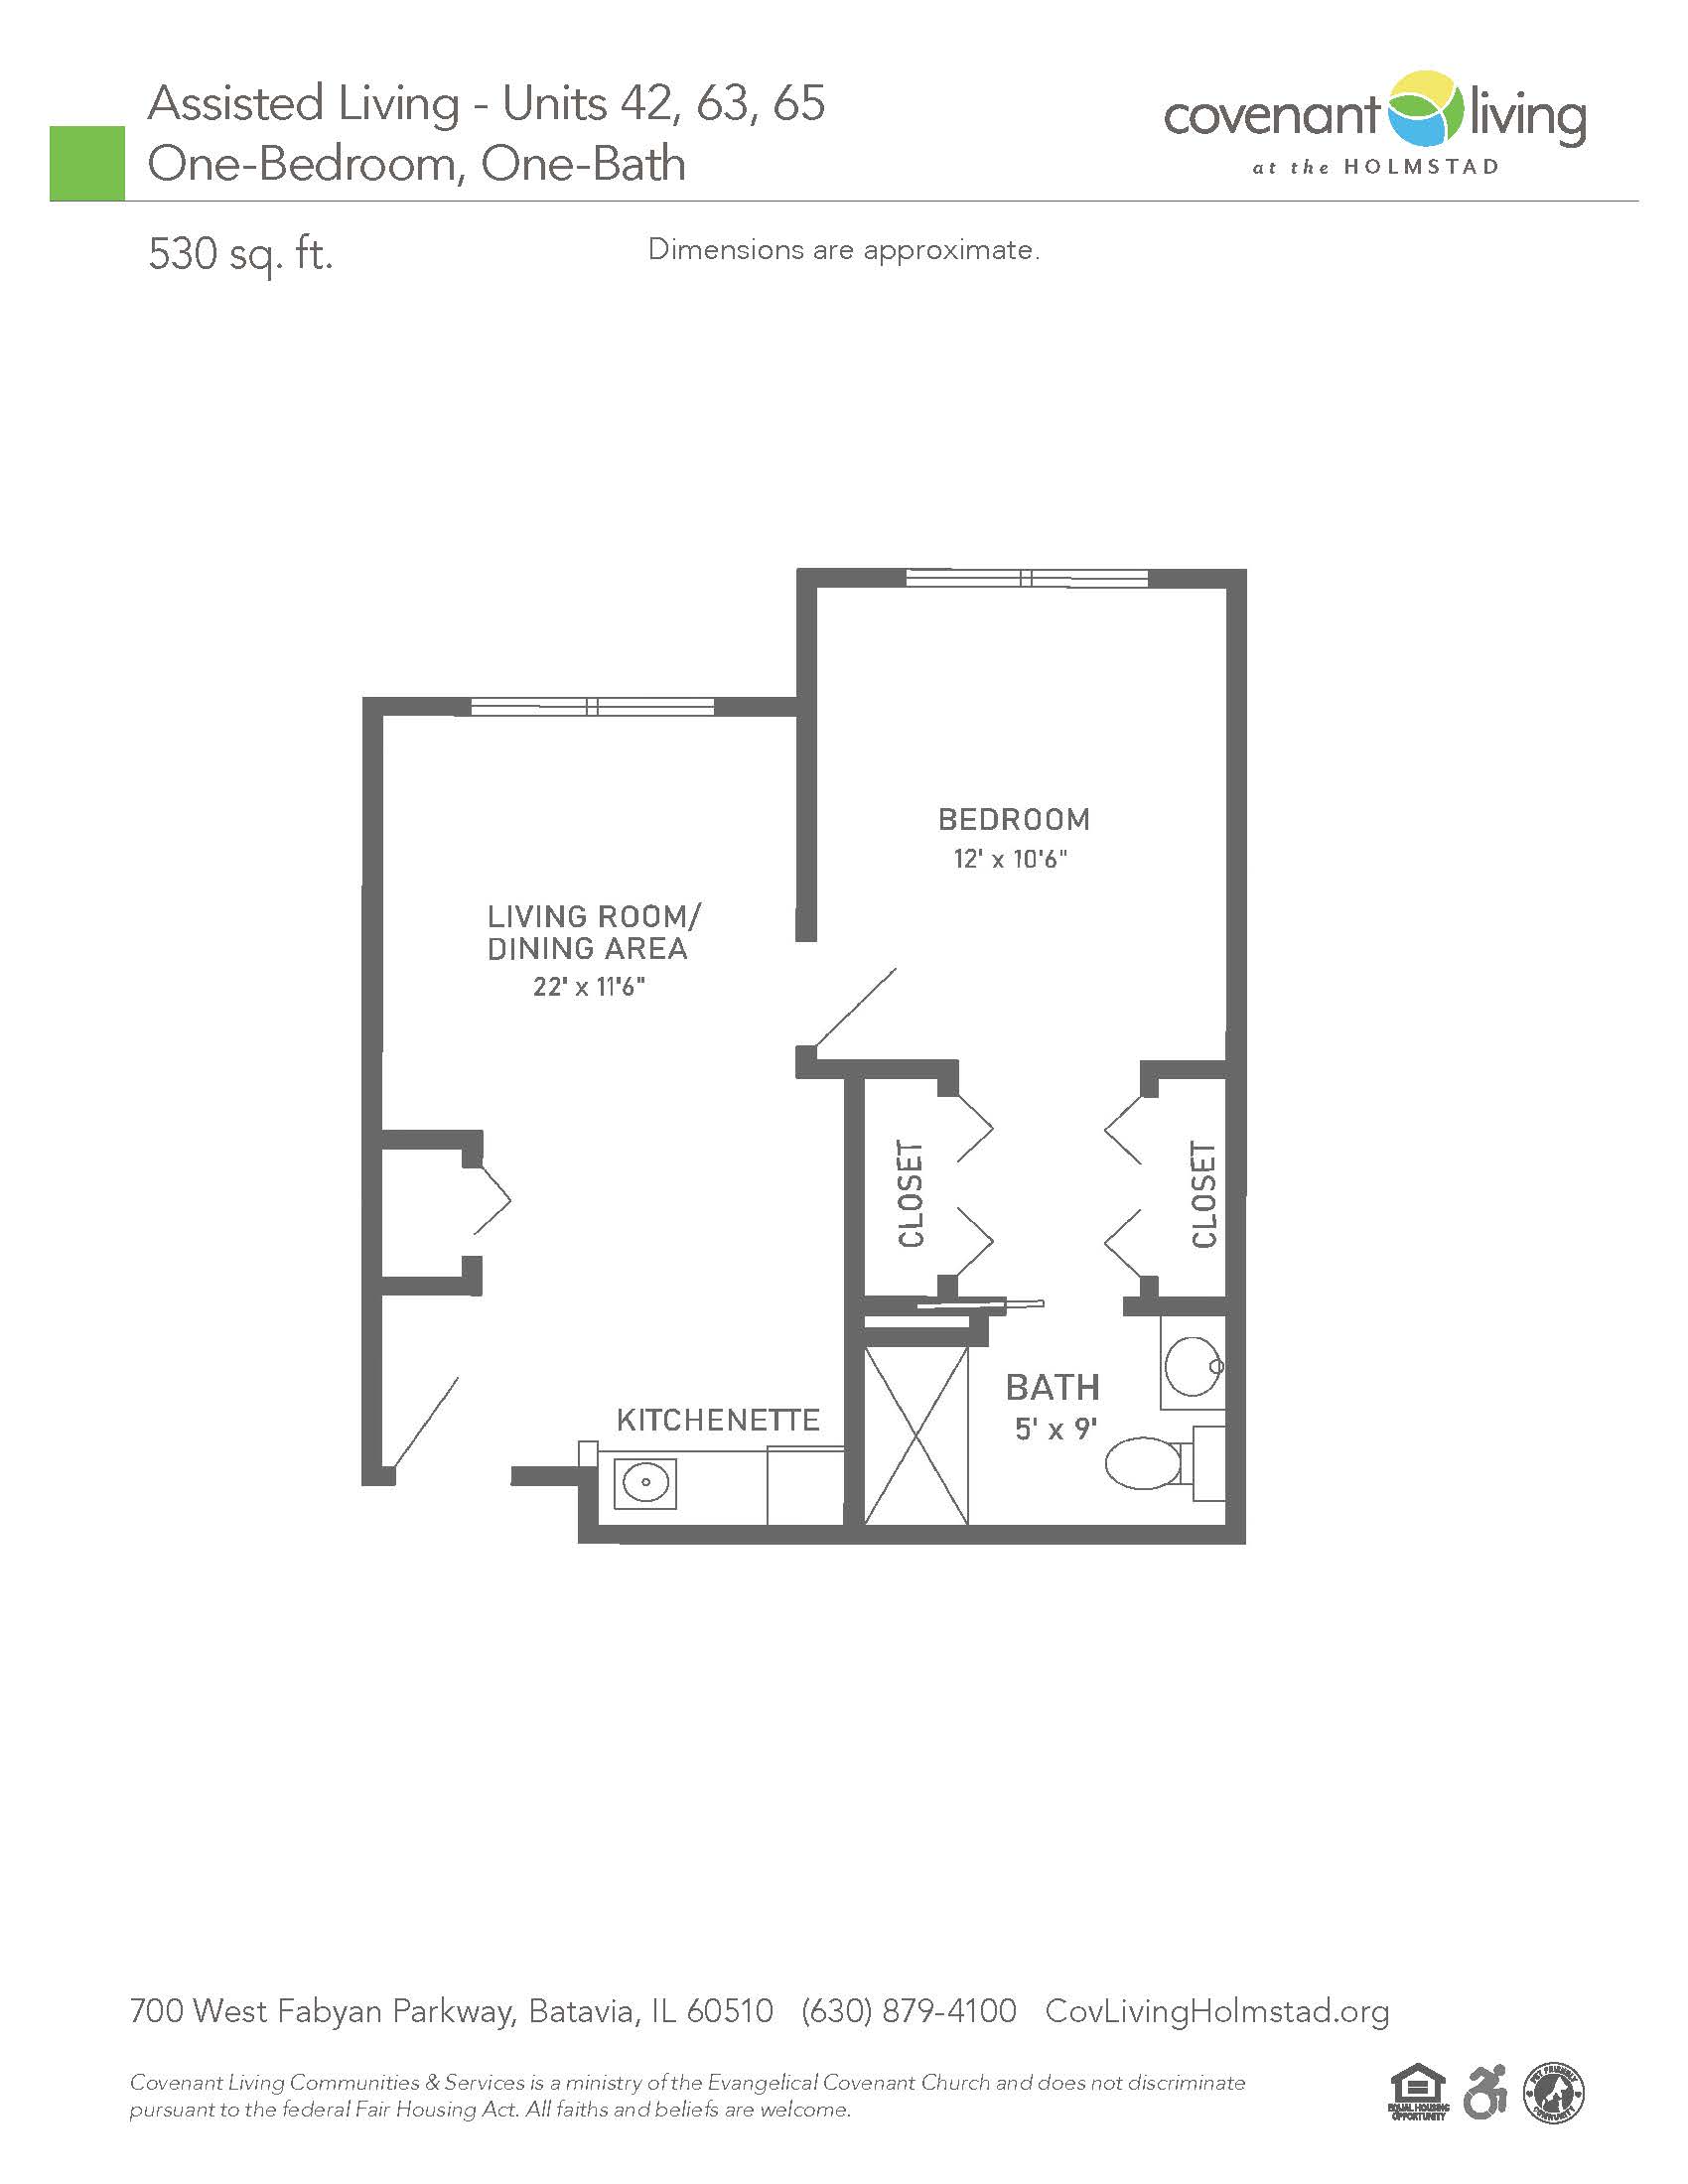 assisted living one bed one bath units 42, 63, 65 floor plan - Holmstad